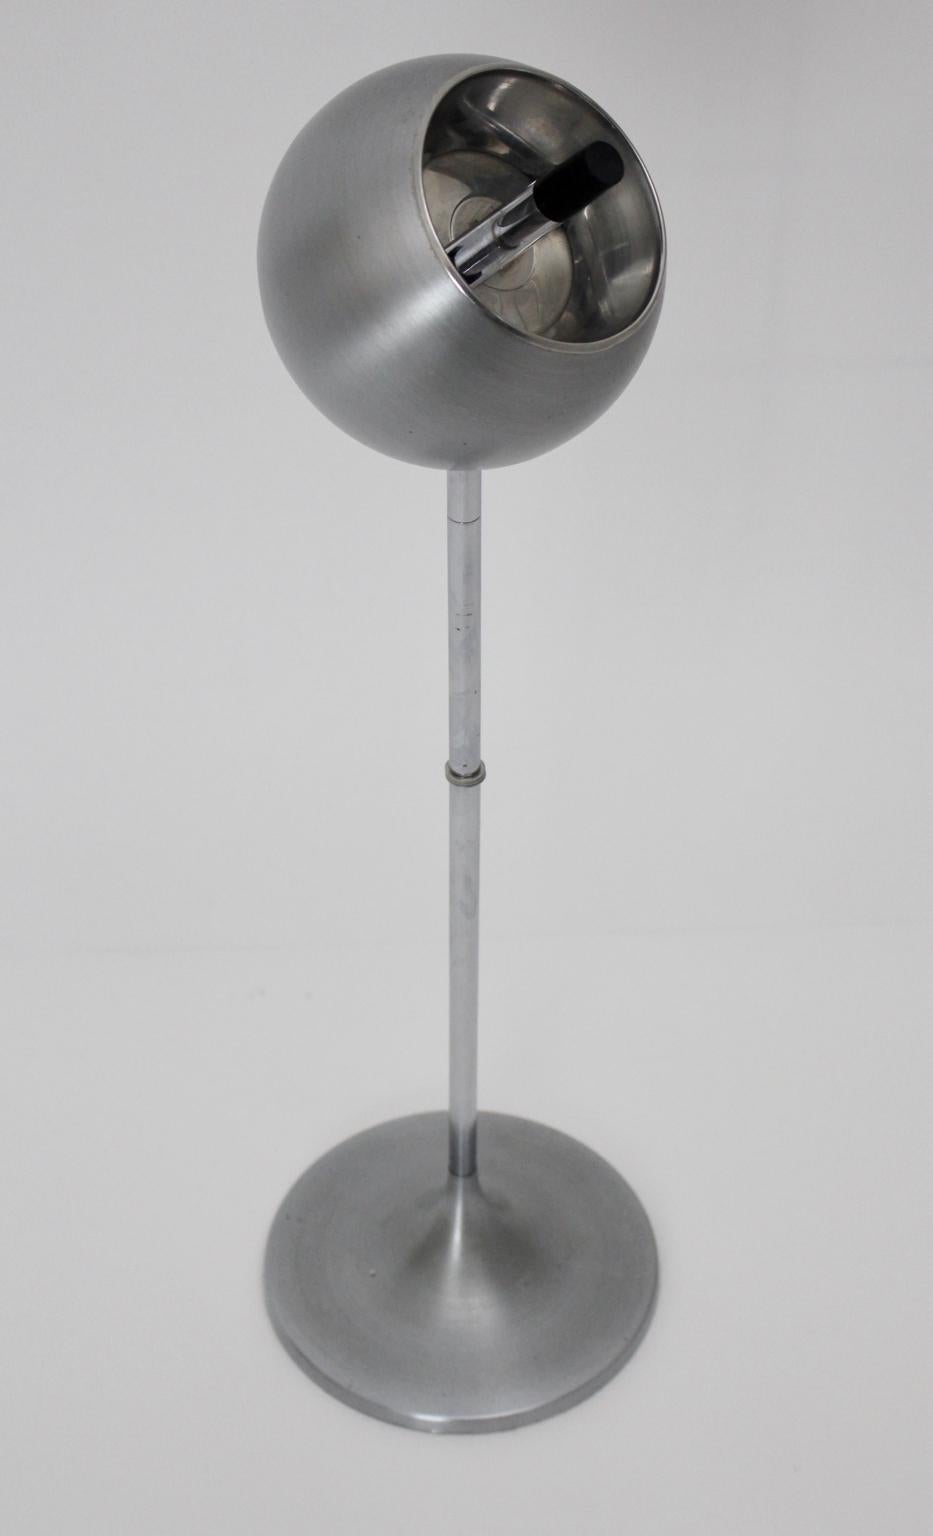 This presented ashtray Stand was made of aluminum and plastic. Also the ashtray is stamped underneath.
Furthermore the ashtray is easy to disassemble for cleaning.
Measures:
Diameter: 19.5 cm
Height: 63.5 cm
All measures are approximate.